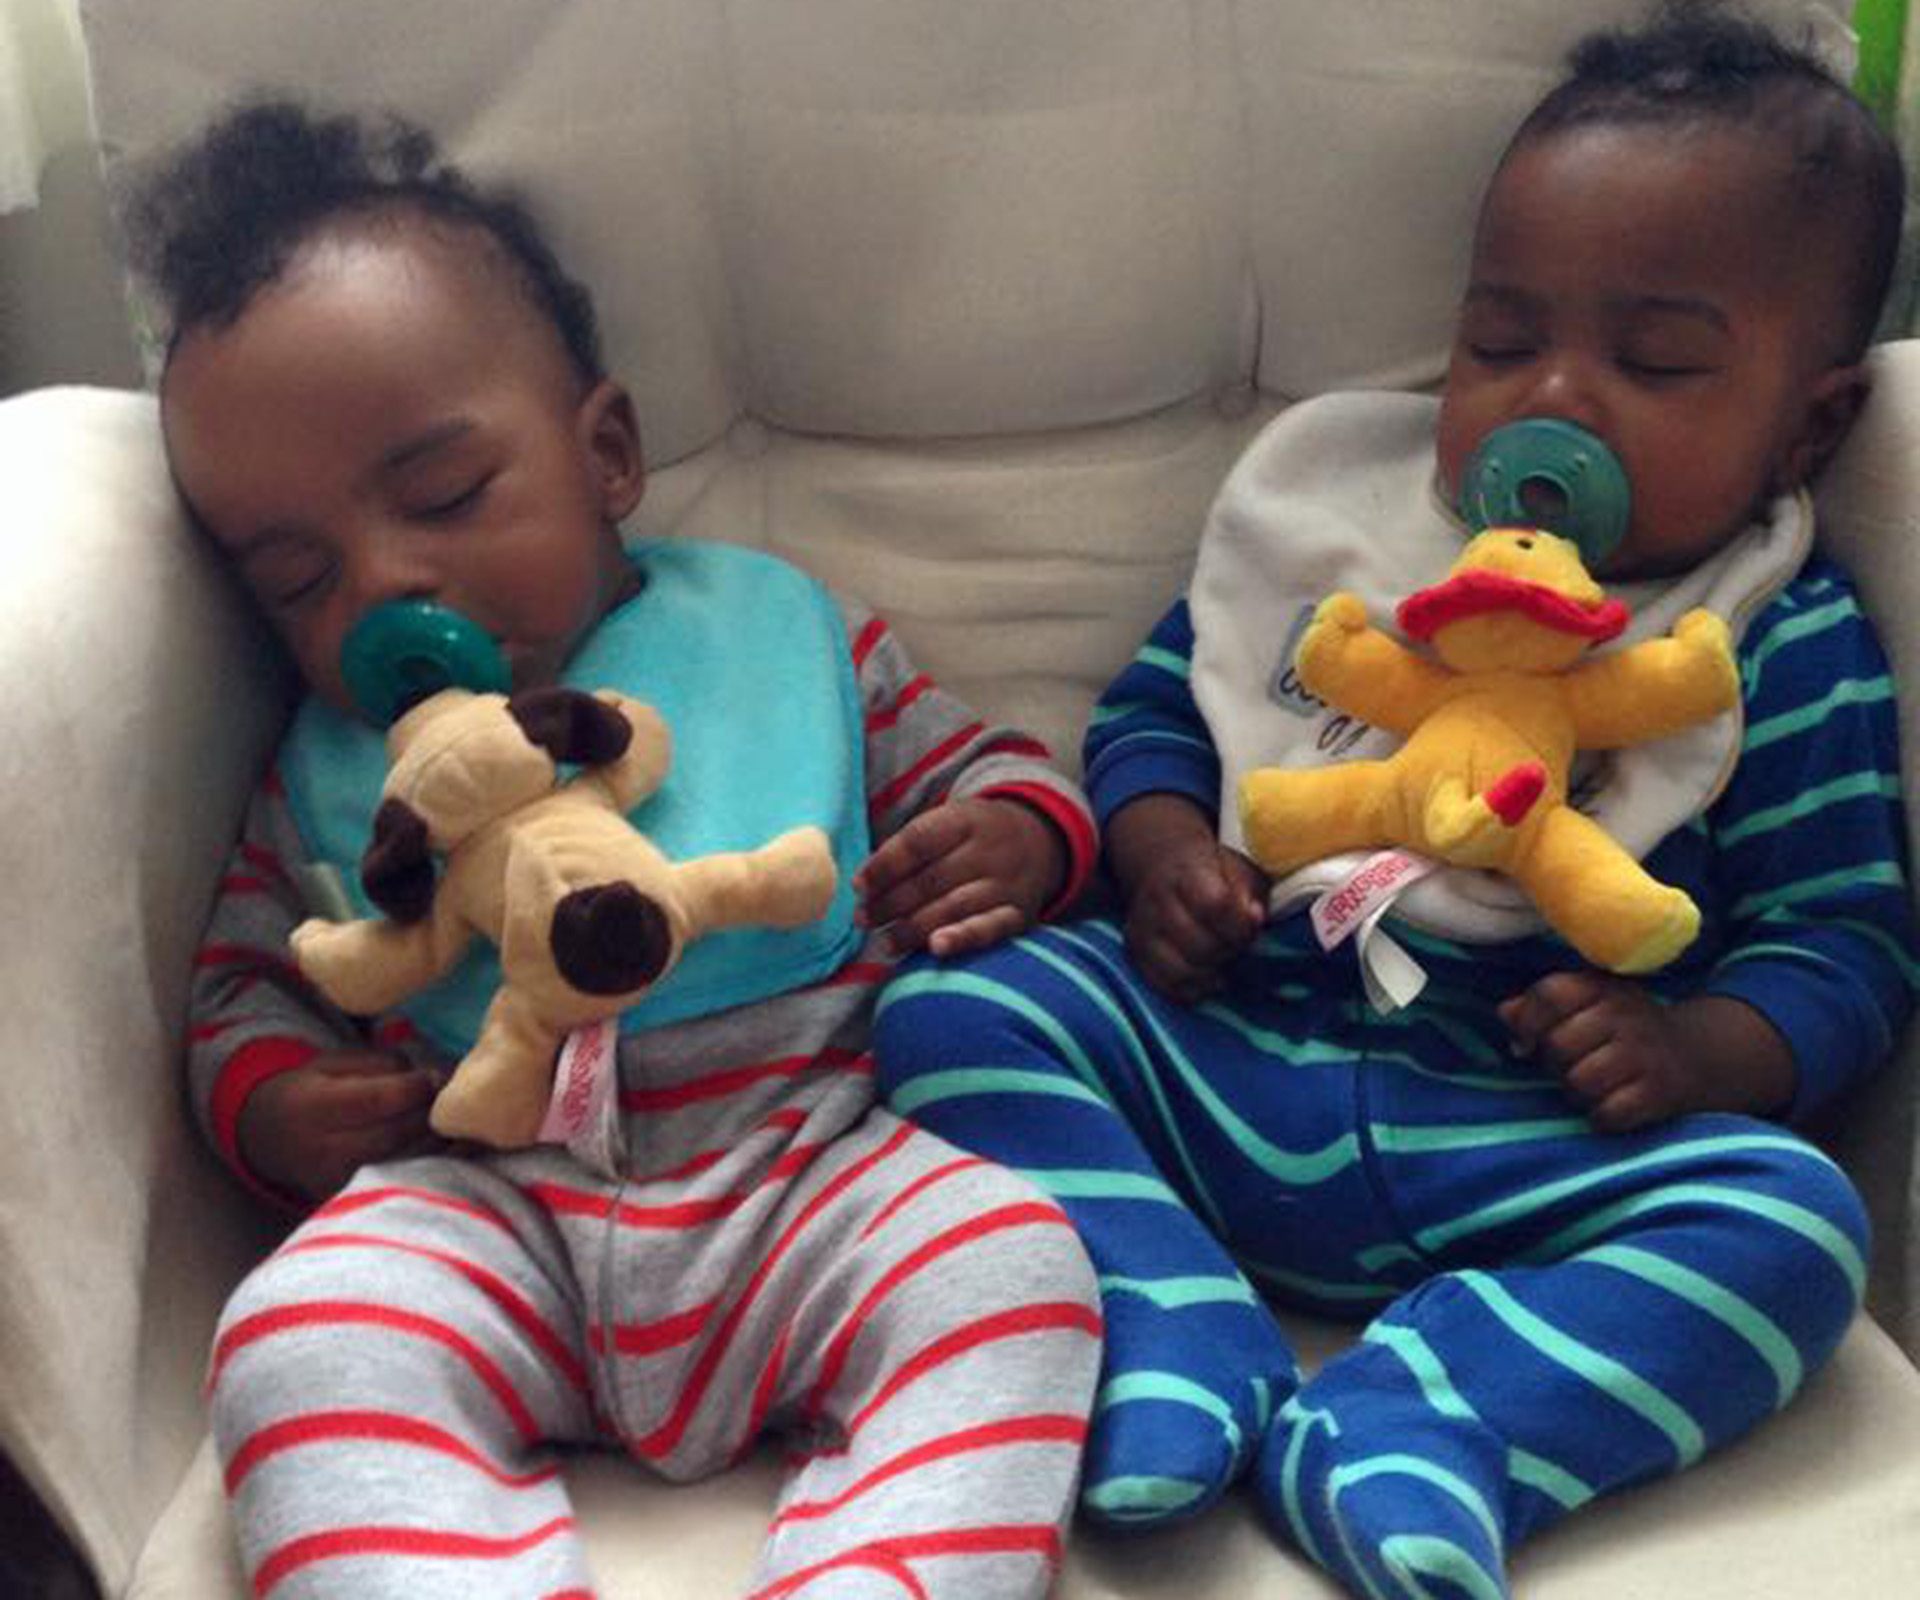 Parents of twins charm plane passengers with thoughtful gifts